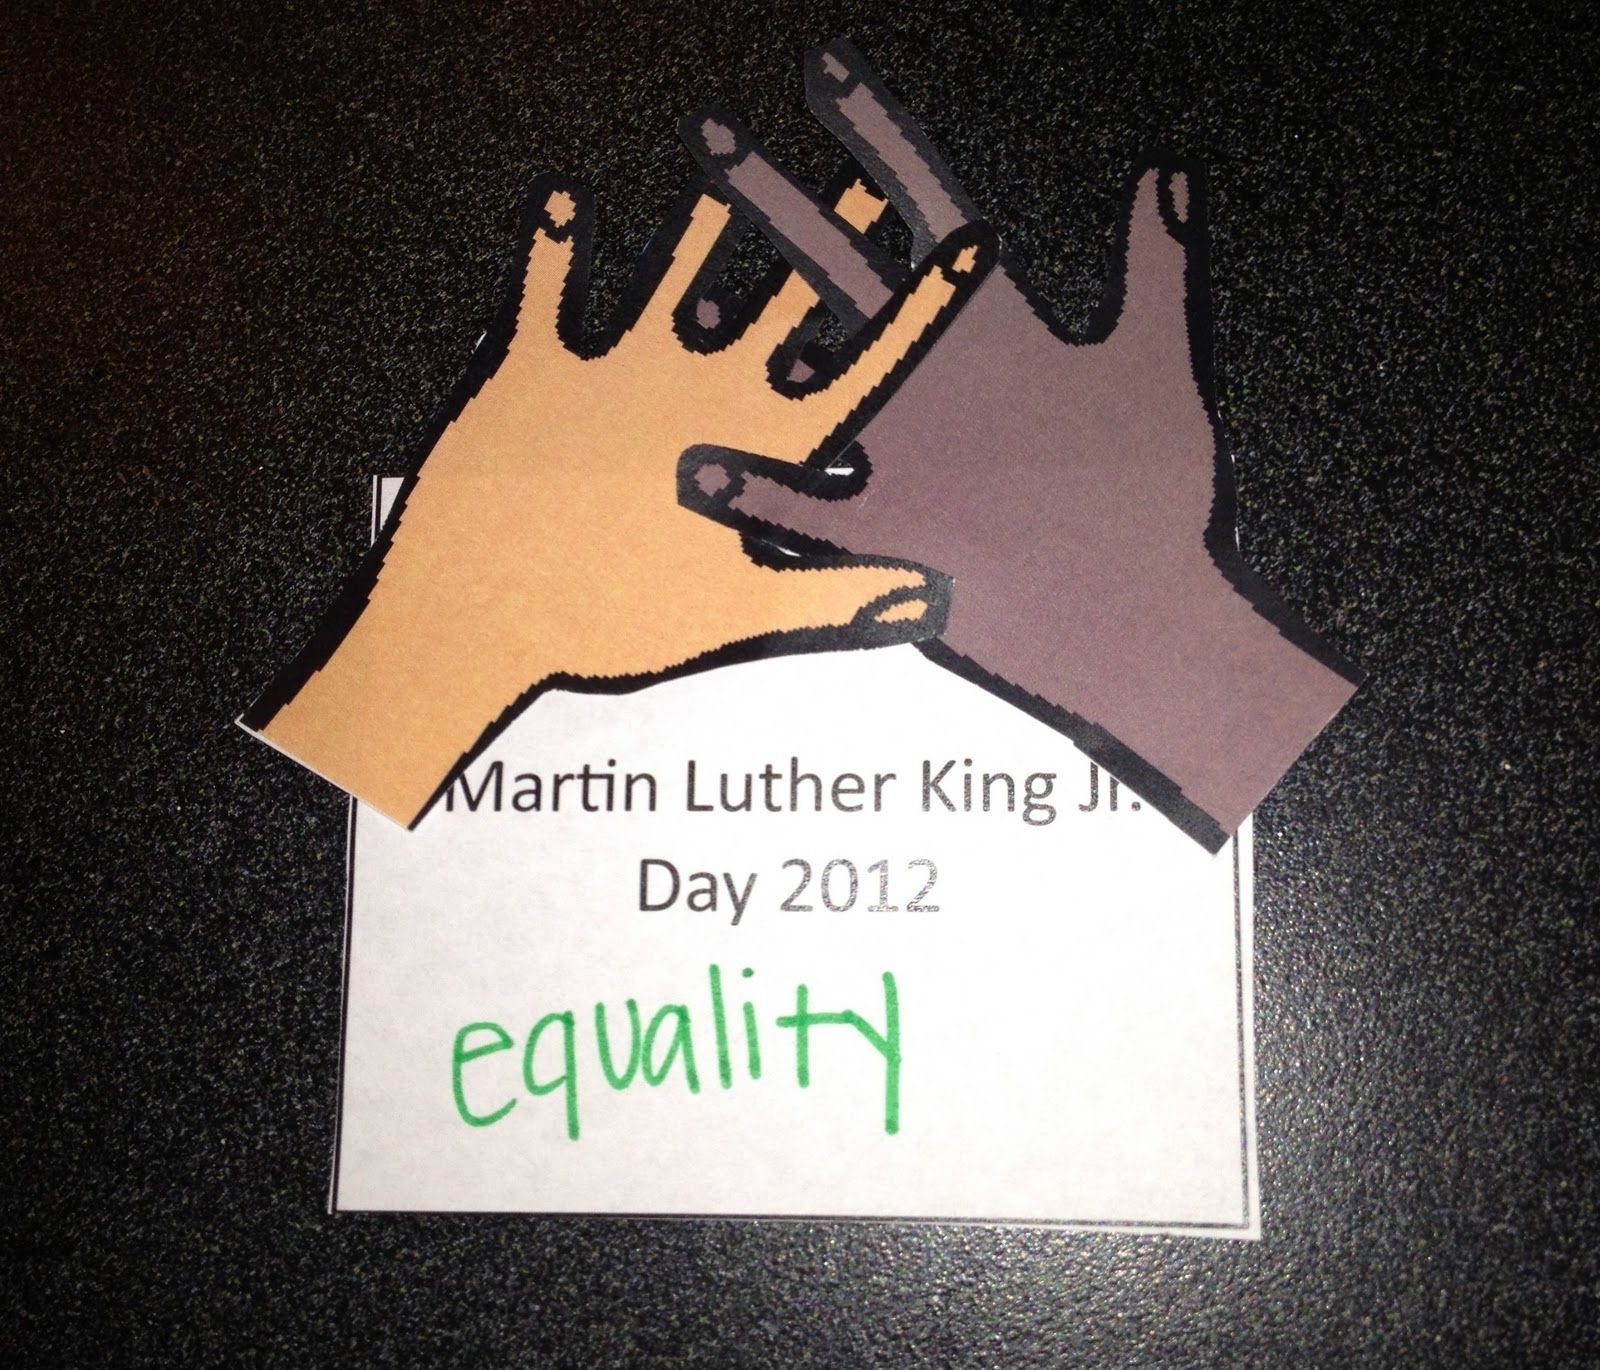 10 Lovable Martin Luther King Craft Ideas dr martin luther king jr crafts craft i made up this little 1 2022